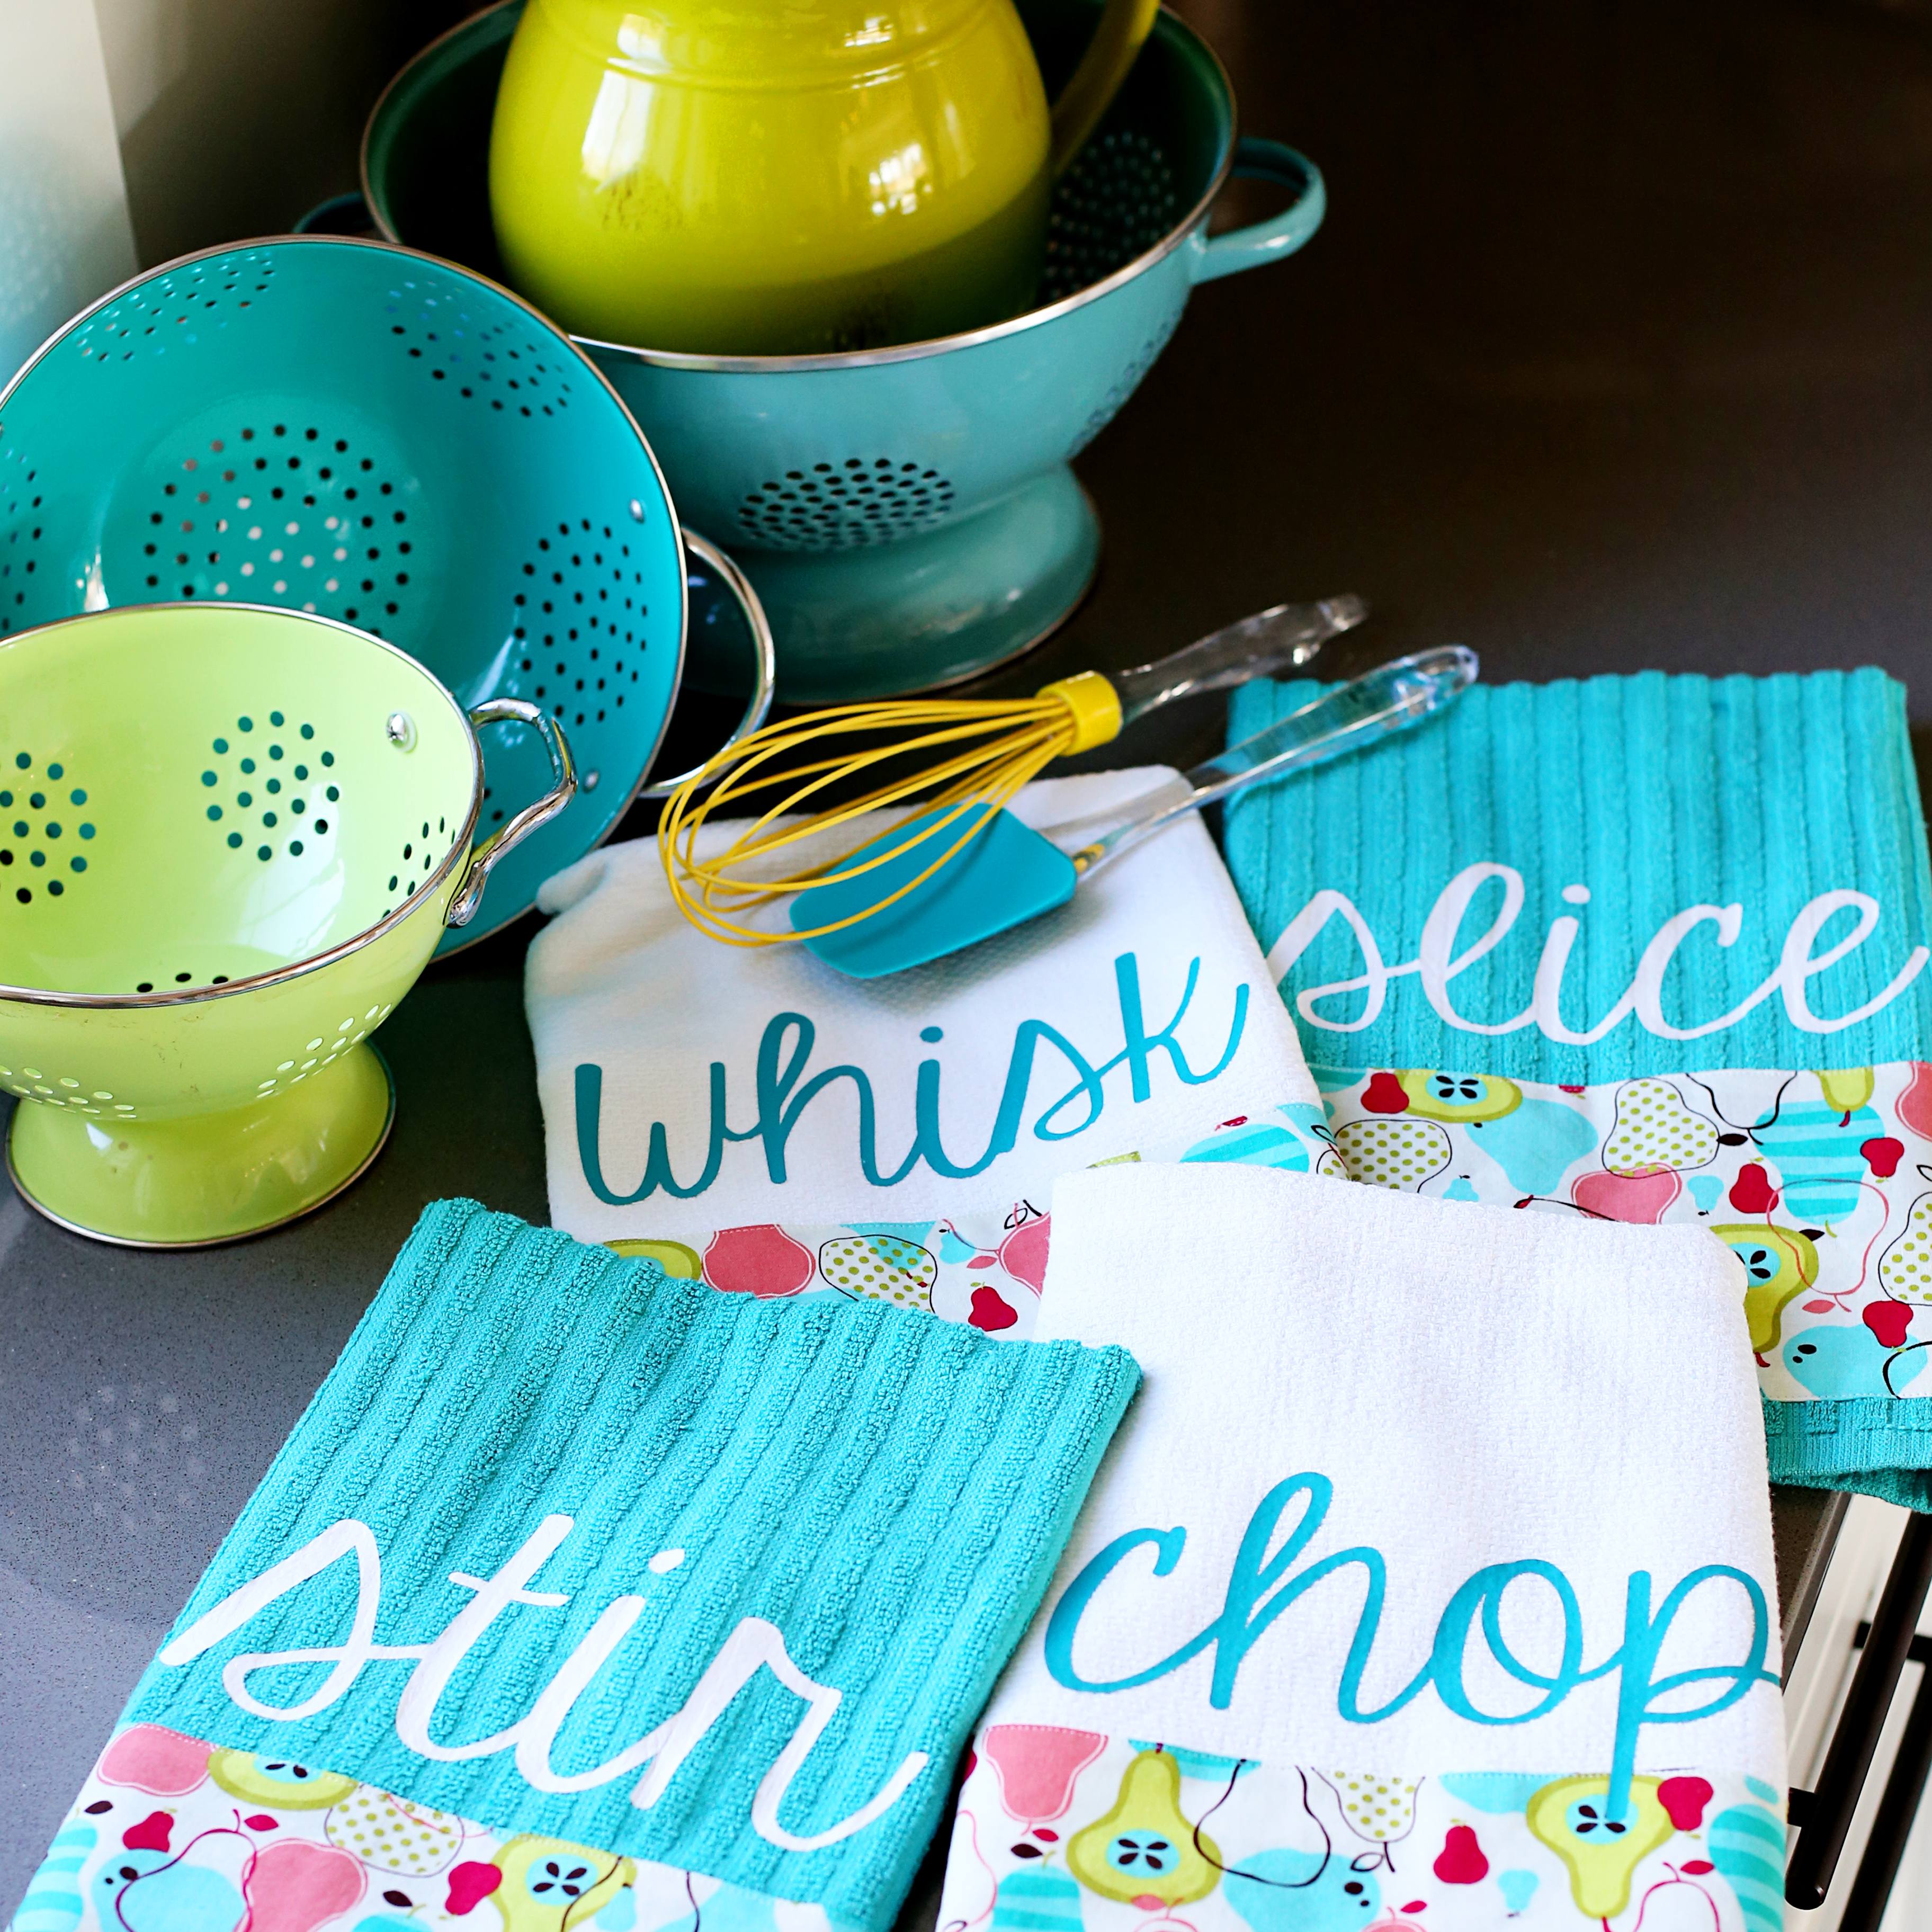 Design Your Own Custom Printed Kitchen Towels